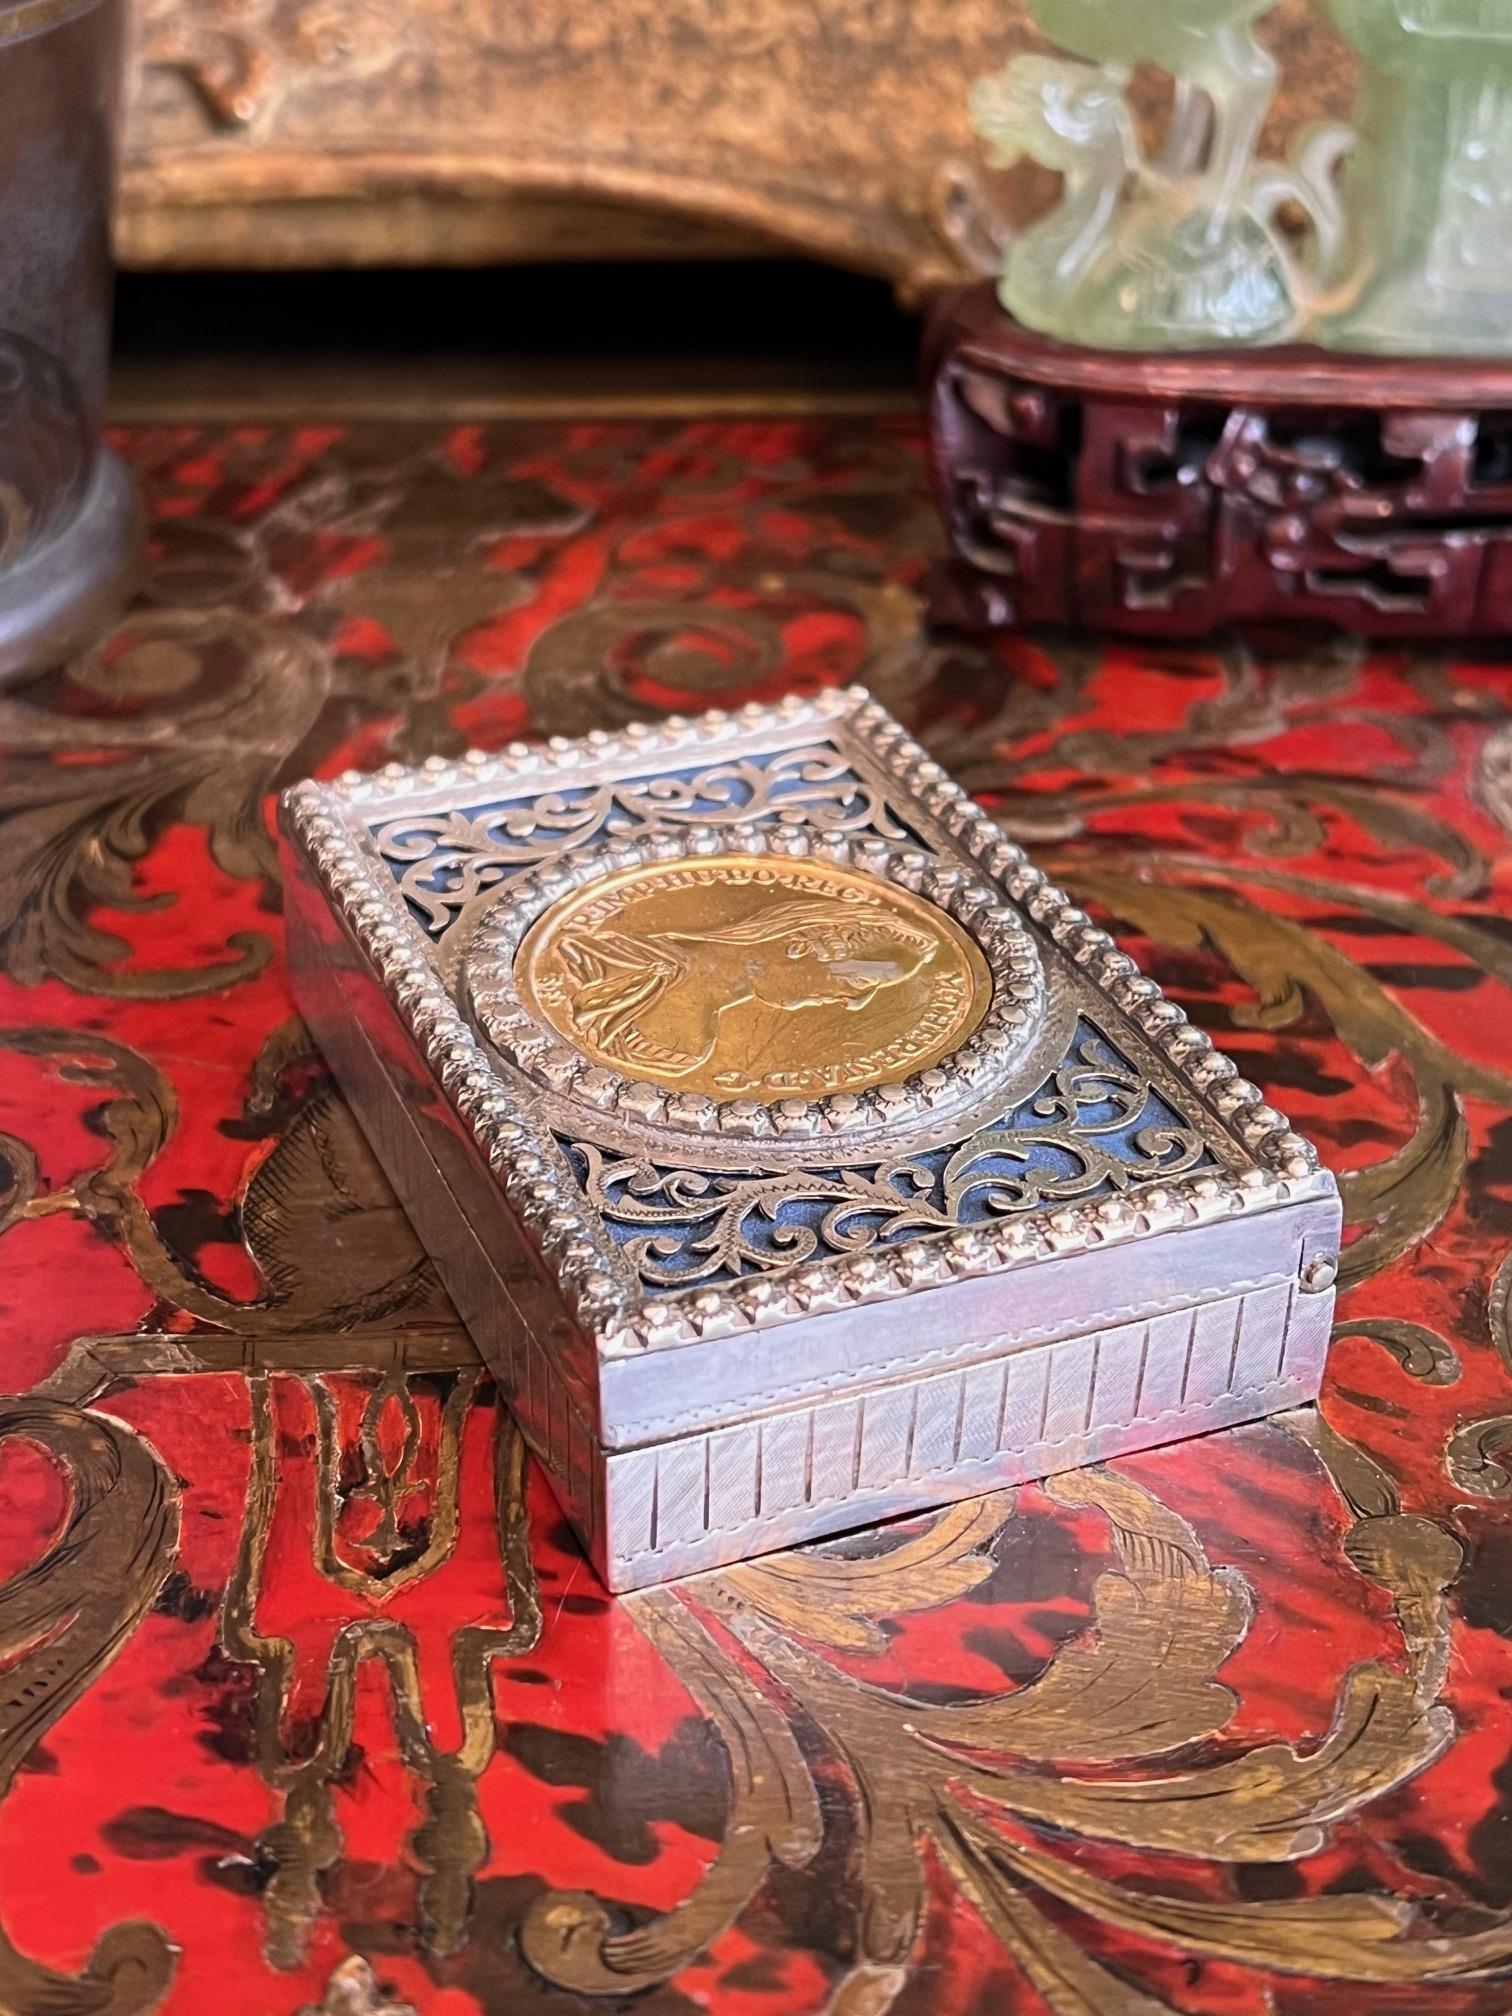 A RUSSIAN SILVER SNUFF BOX INLAID WITH A MARIA THERESA COIN - Image 5 of 6